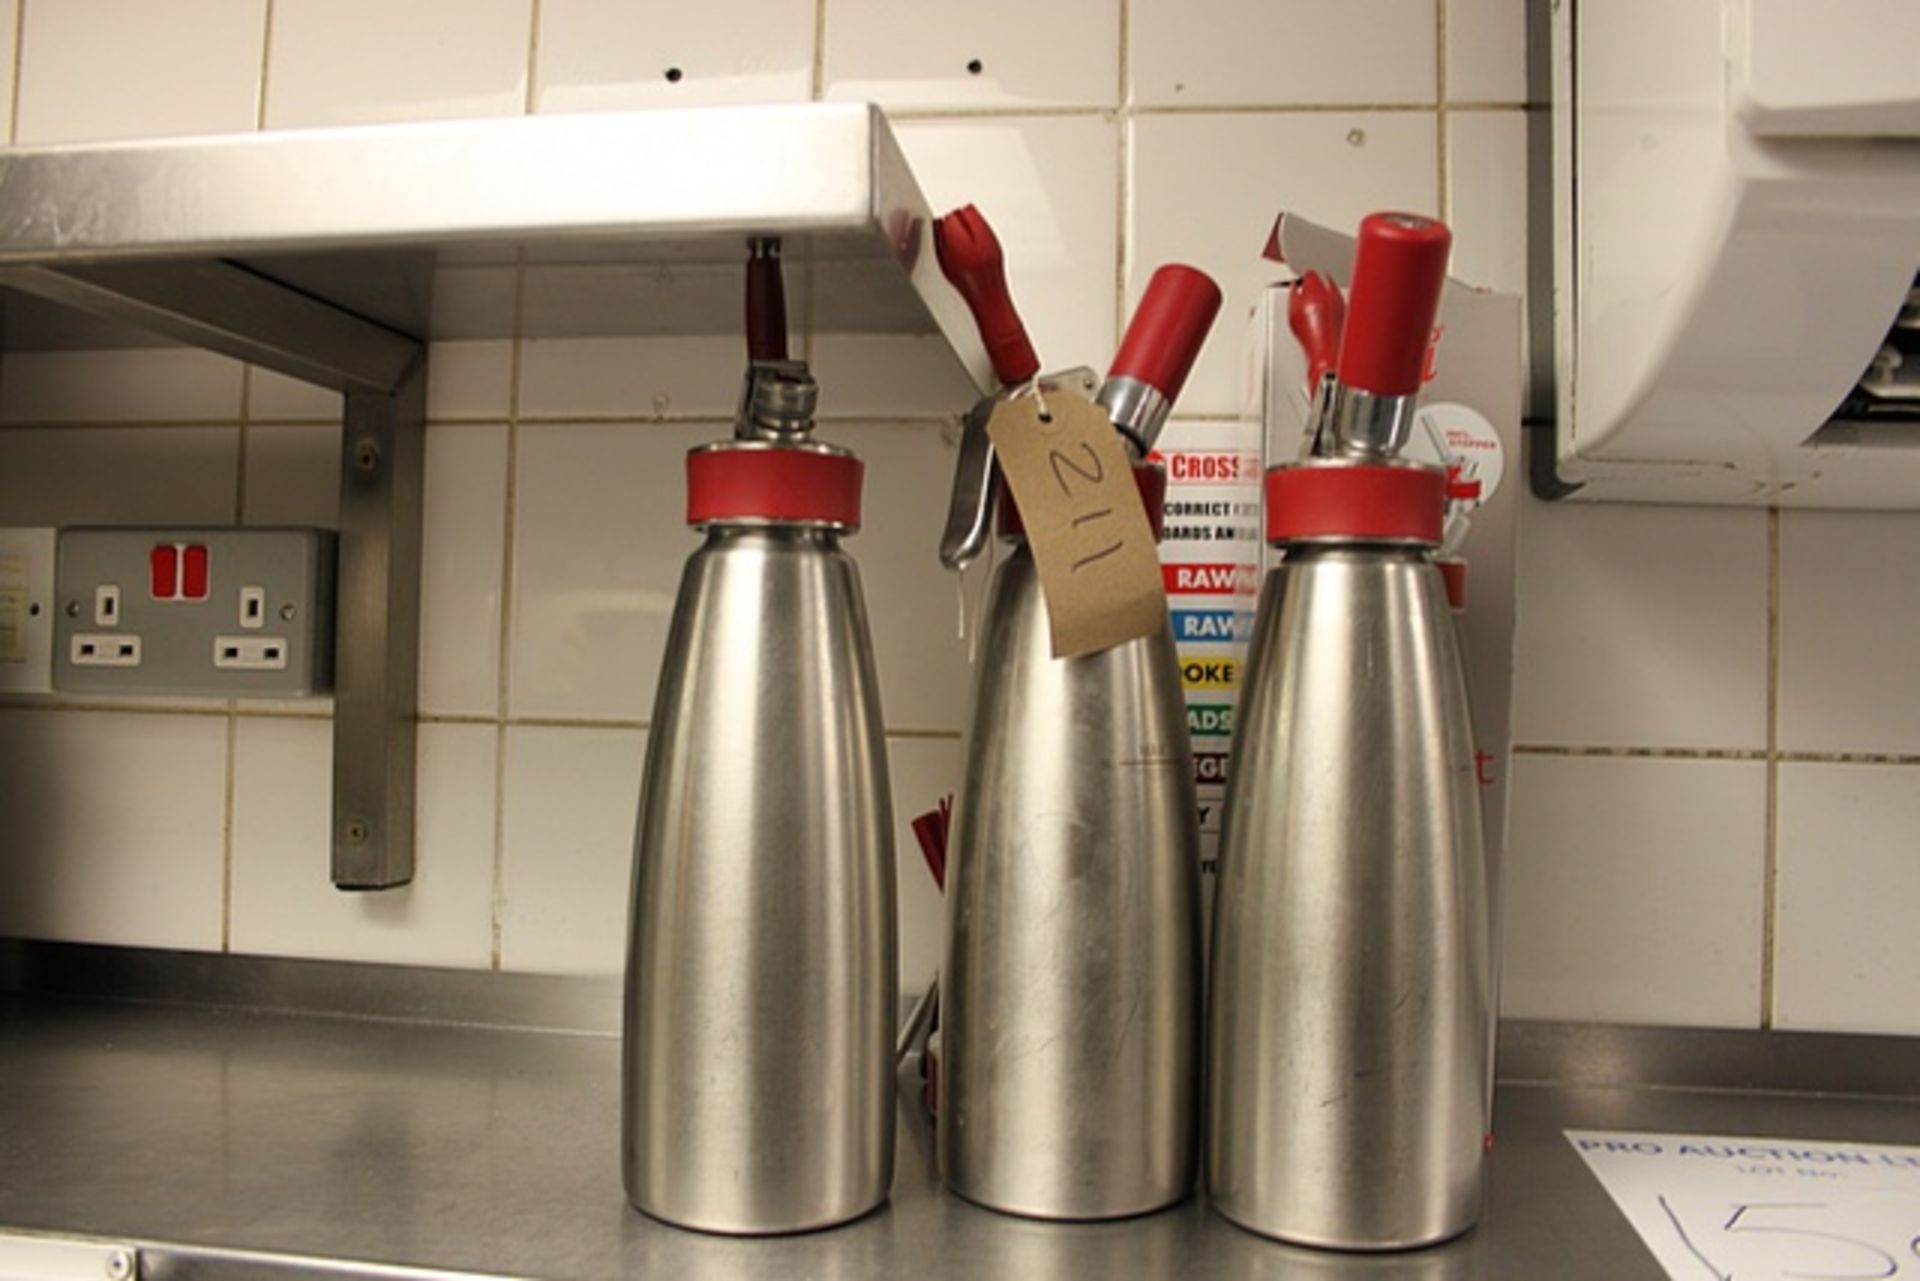 4 x Gourmet Whip 1ltr brushed steel